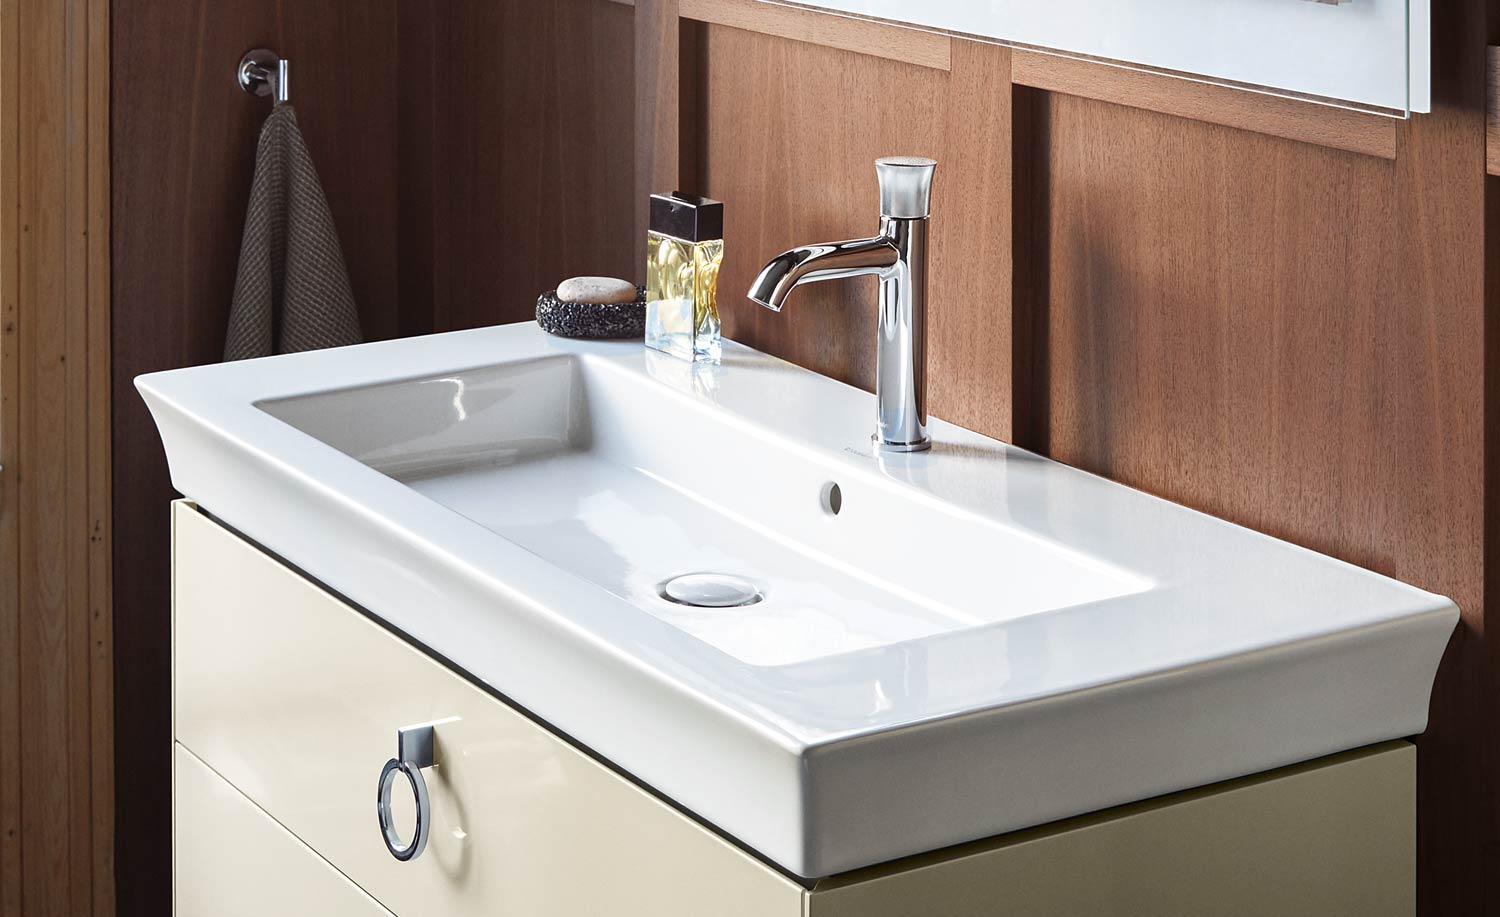 Washbasin with single lever faucet
